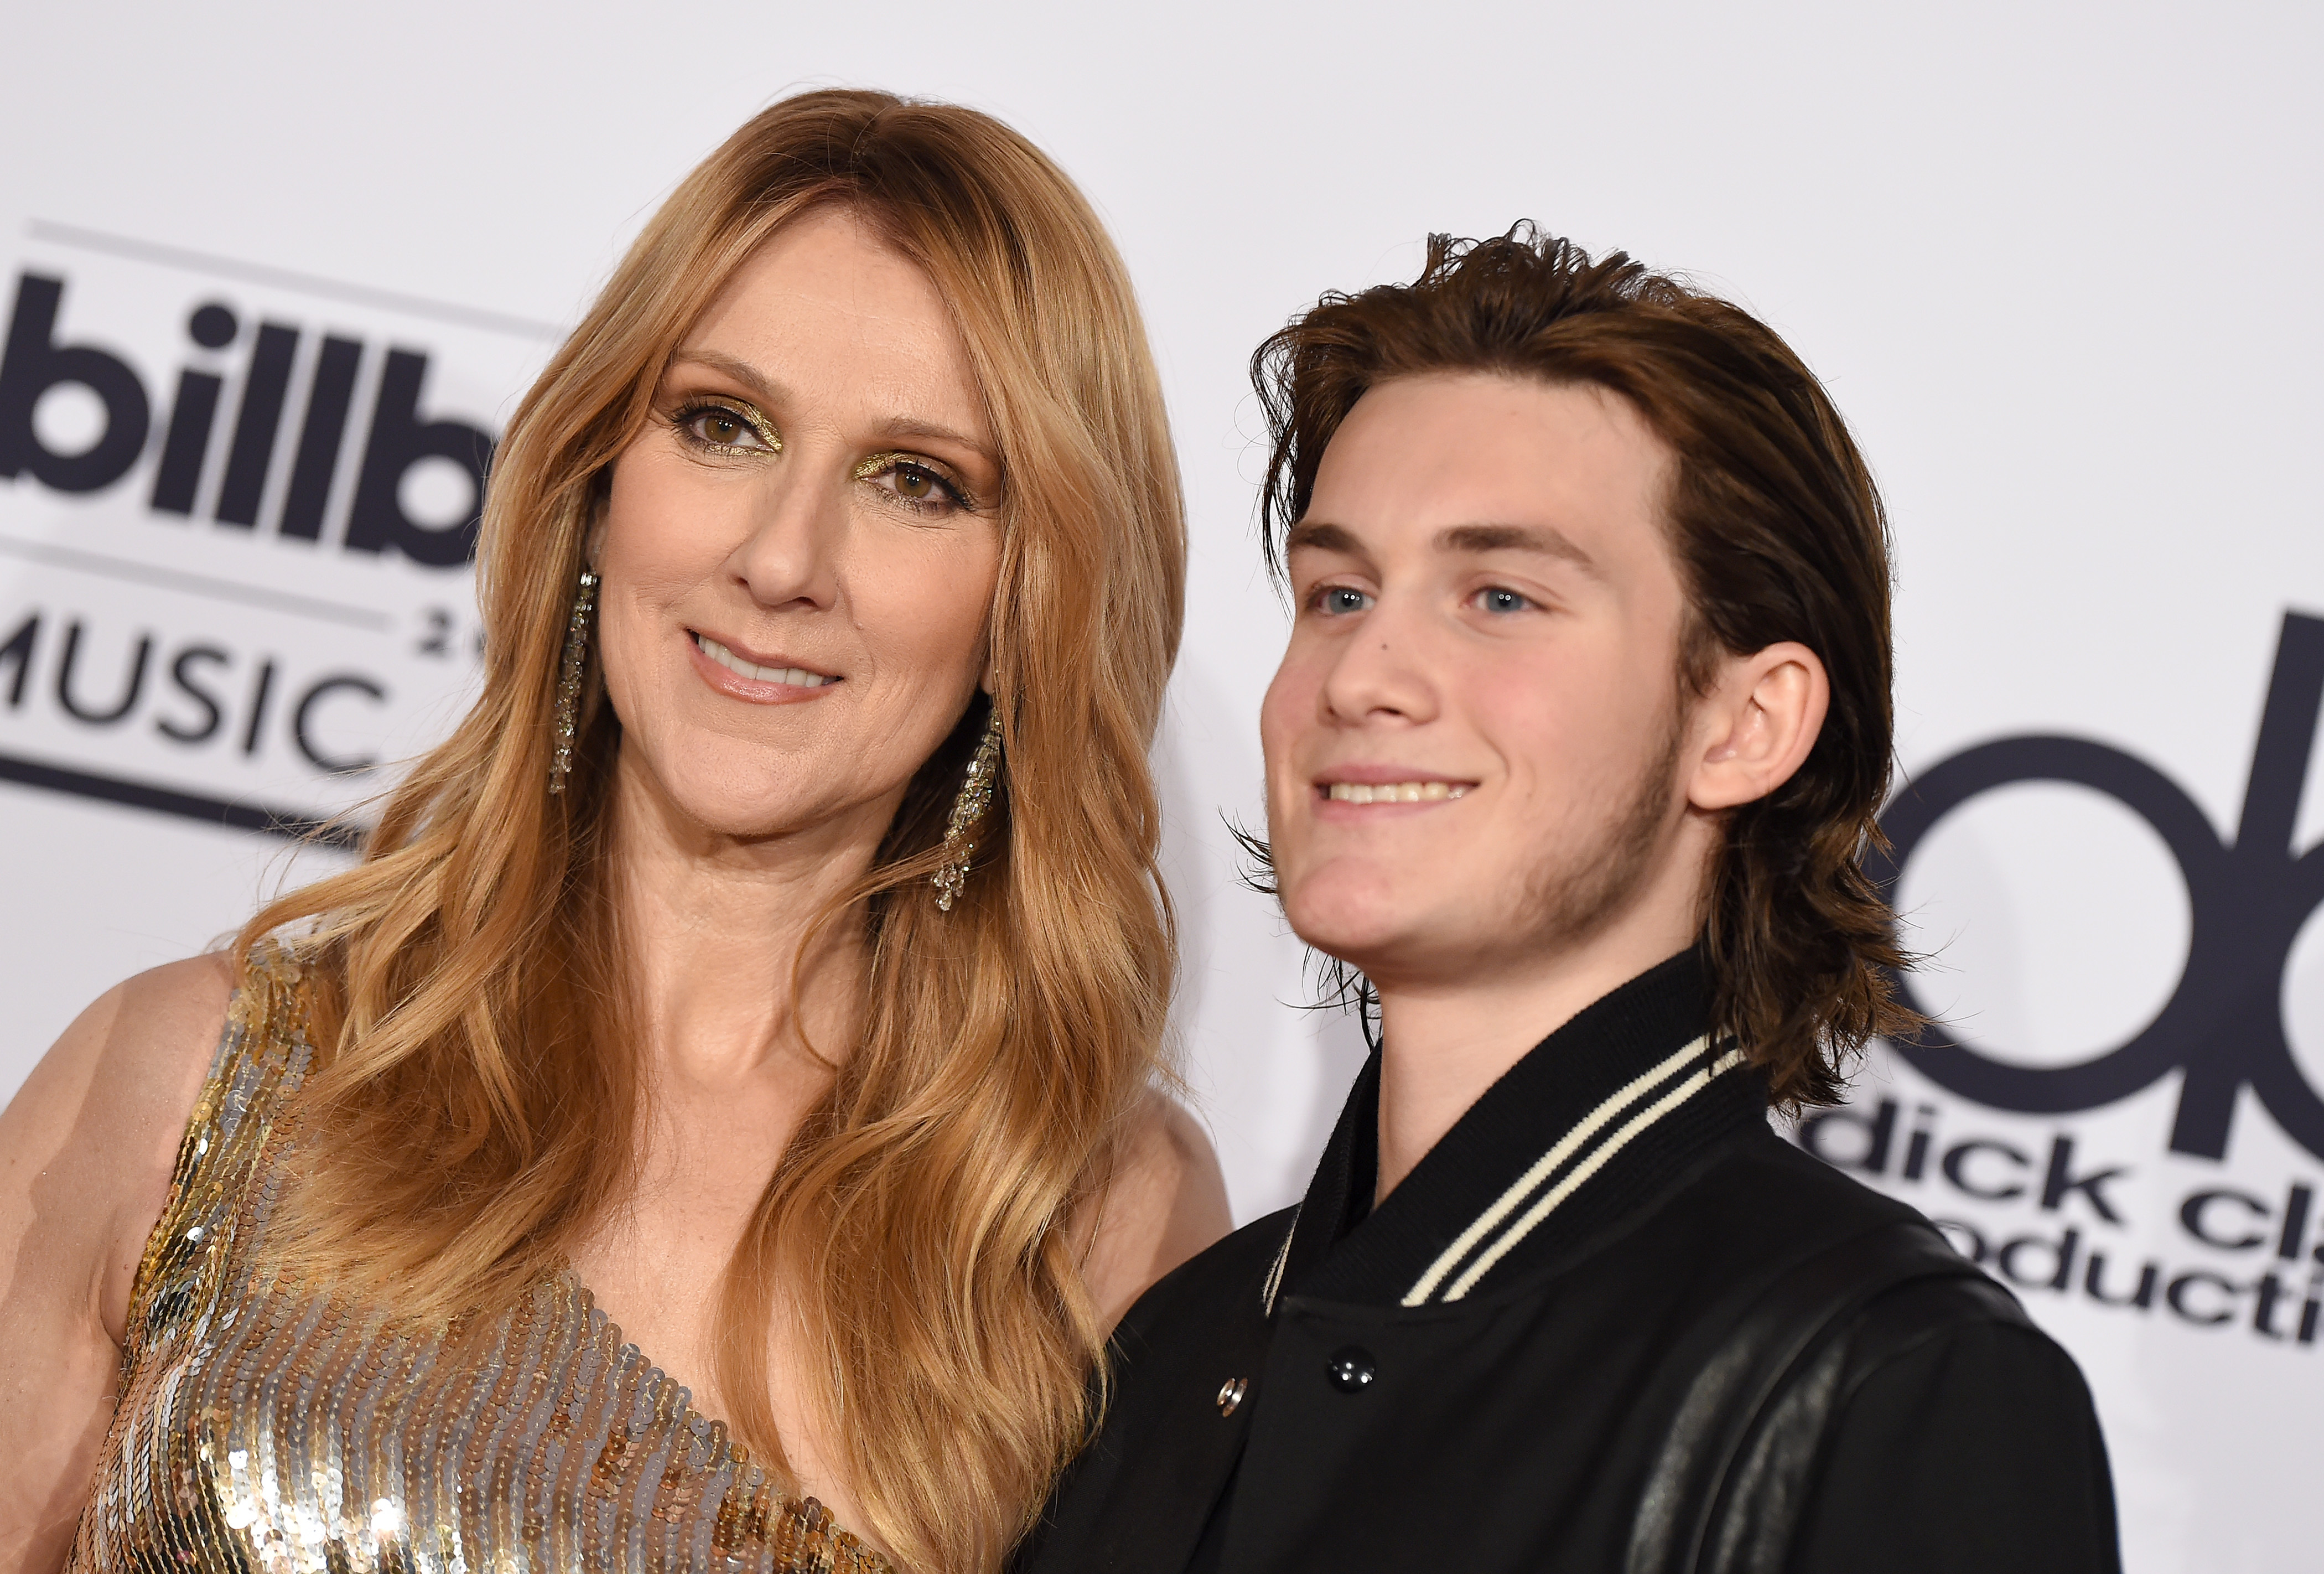 Celine Dion and Rene-Charles Angelil on May 22, 2016 in Las Vegas, Nevada | Source: Getty Images